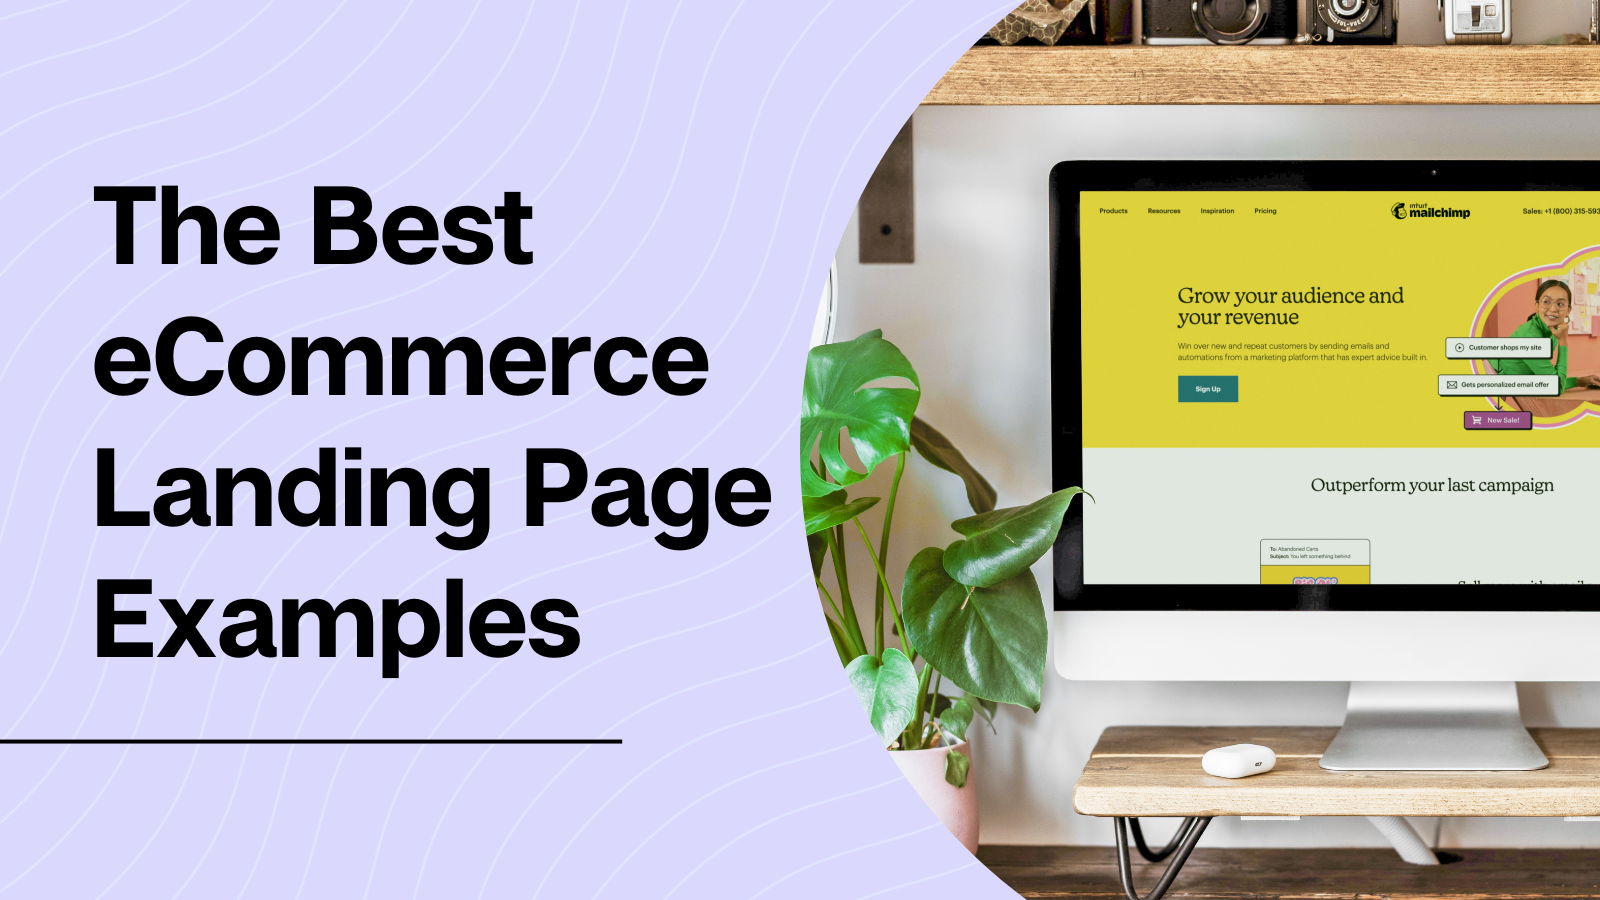 The Best eCommerce Landing Page Examples